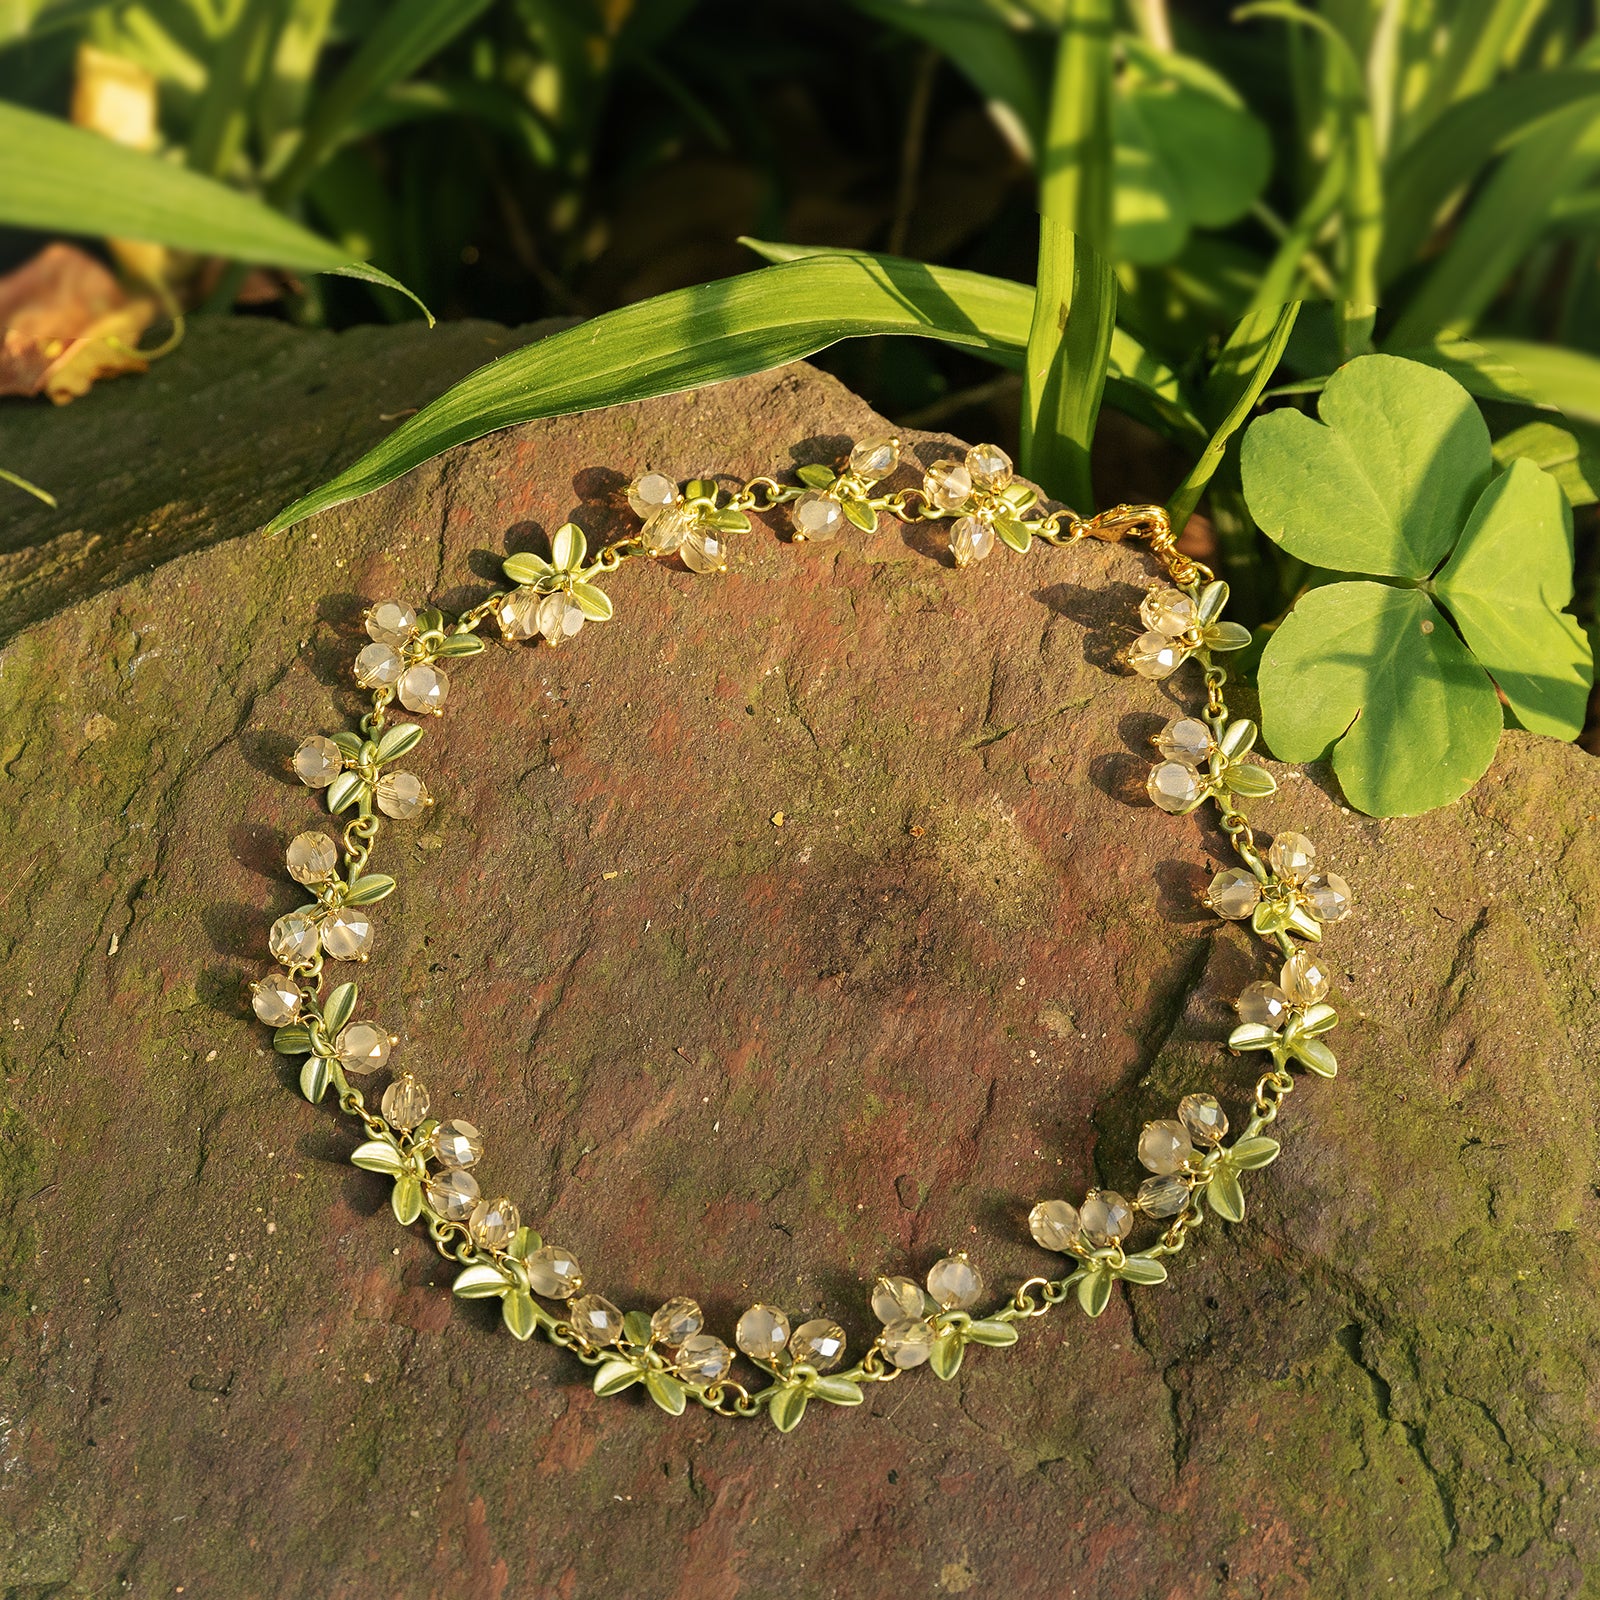 White Currant Necklace